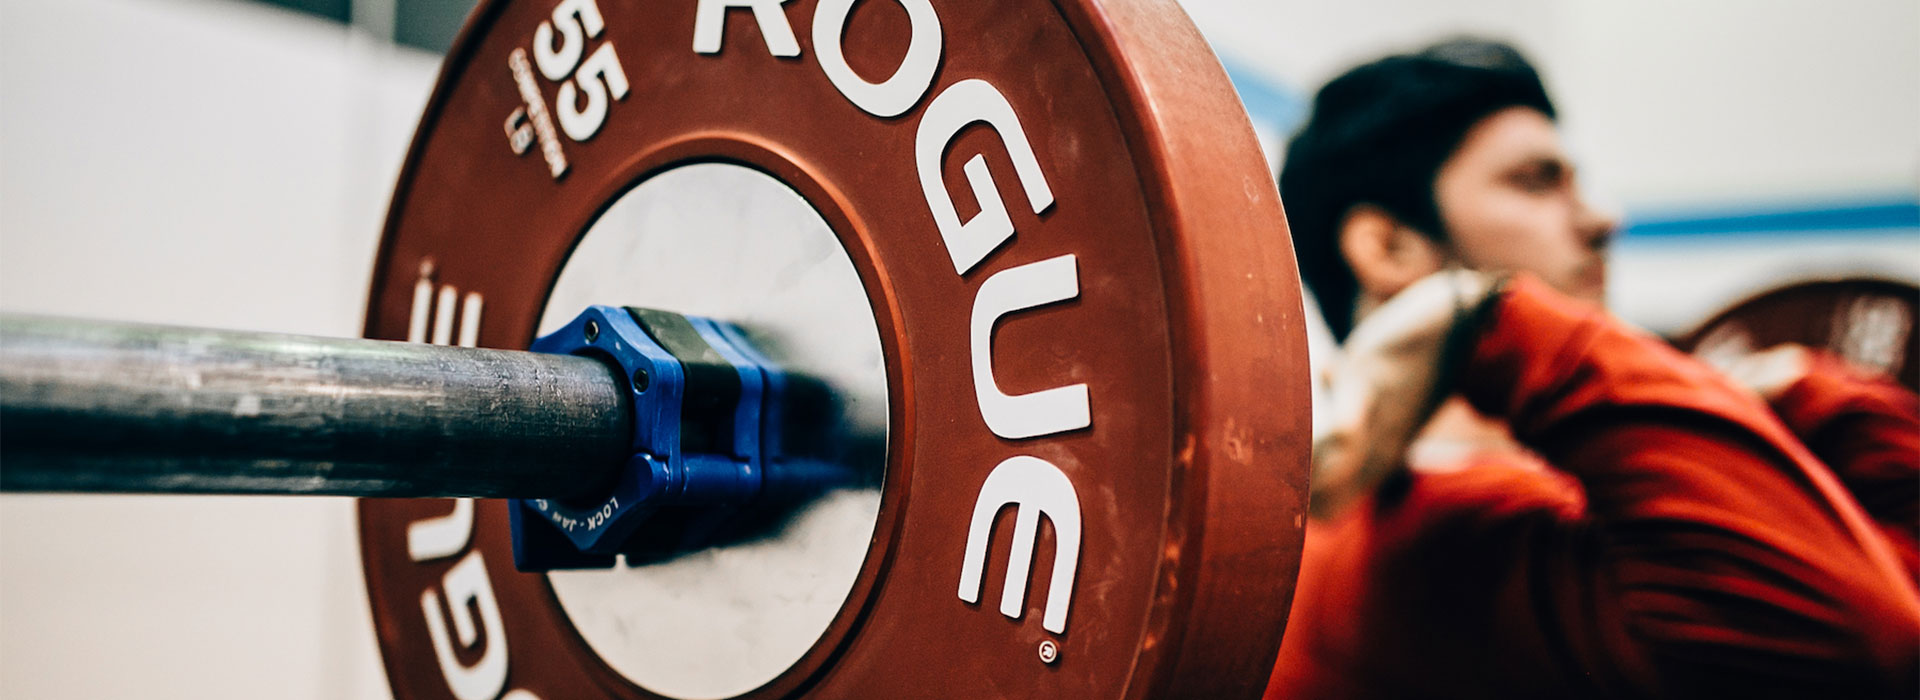 Top 5 Best Gyms To Join Near Sheboygan, Wisconsin